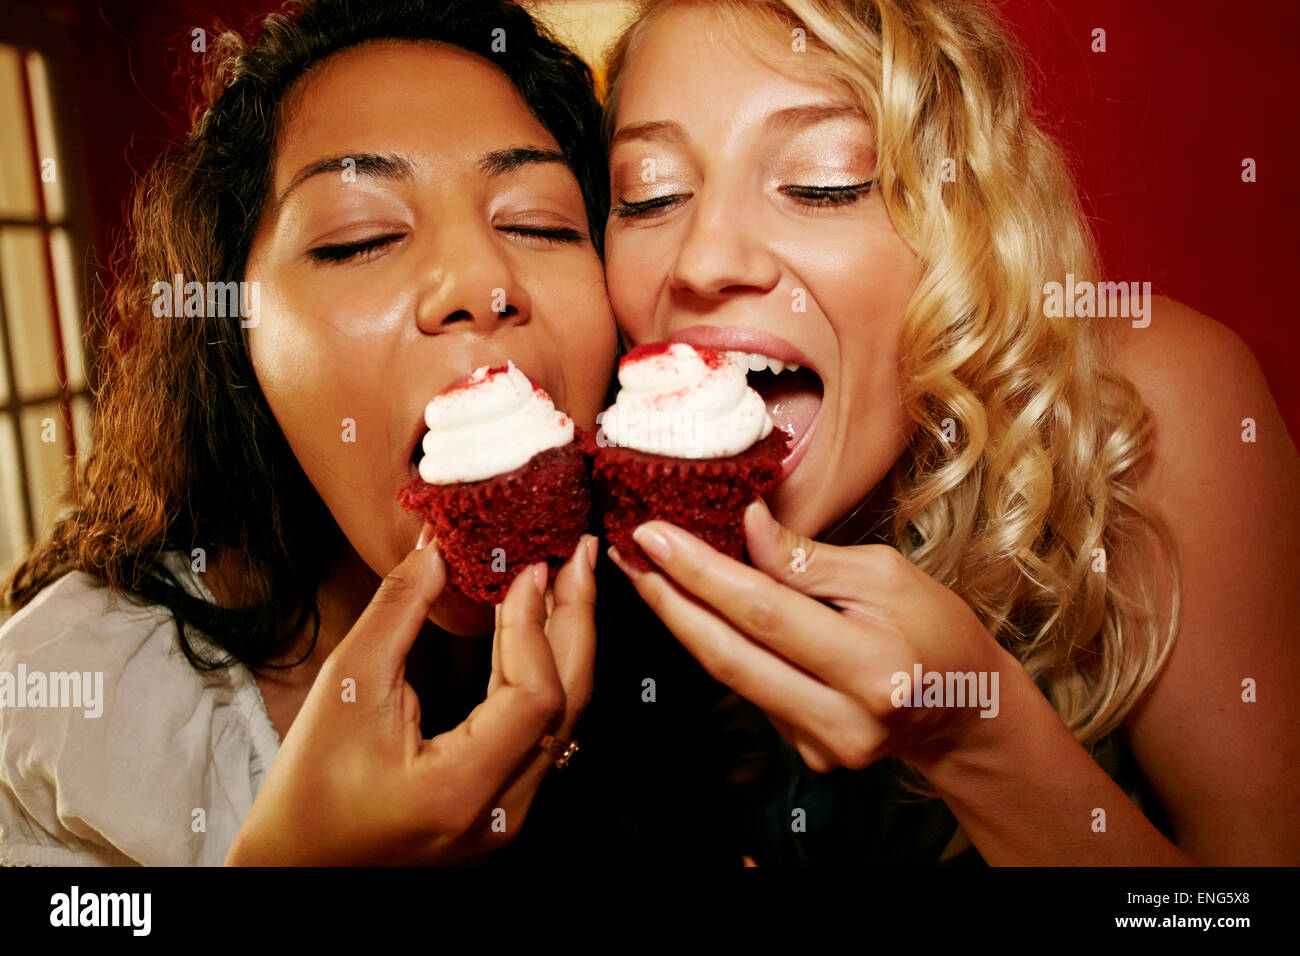 Close up of women eating red velvet cupcakes Stock Photo